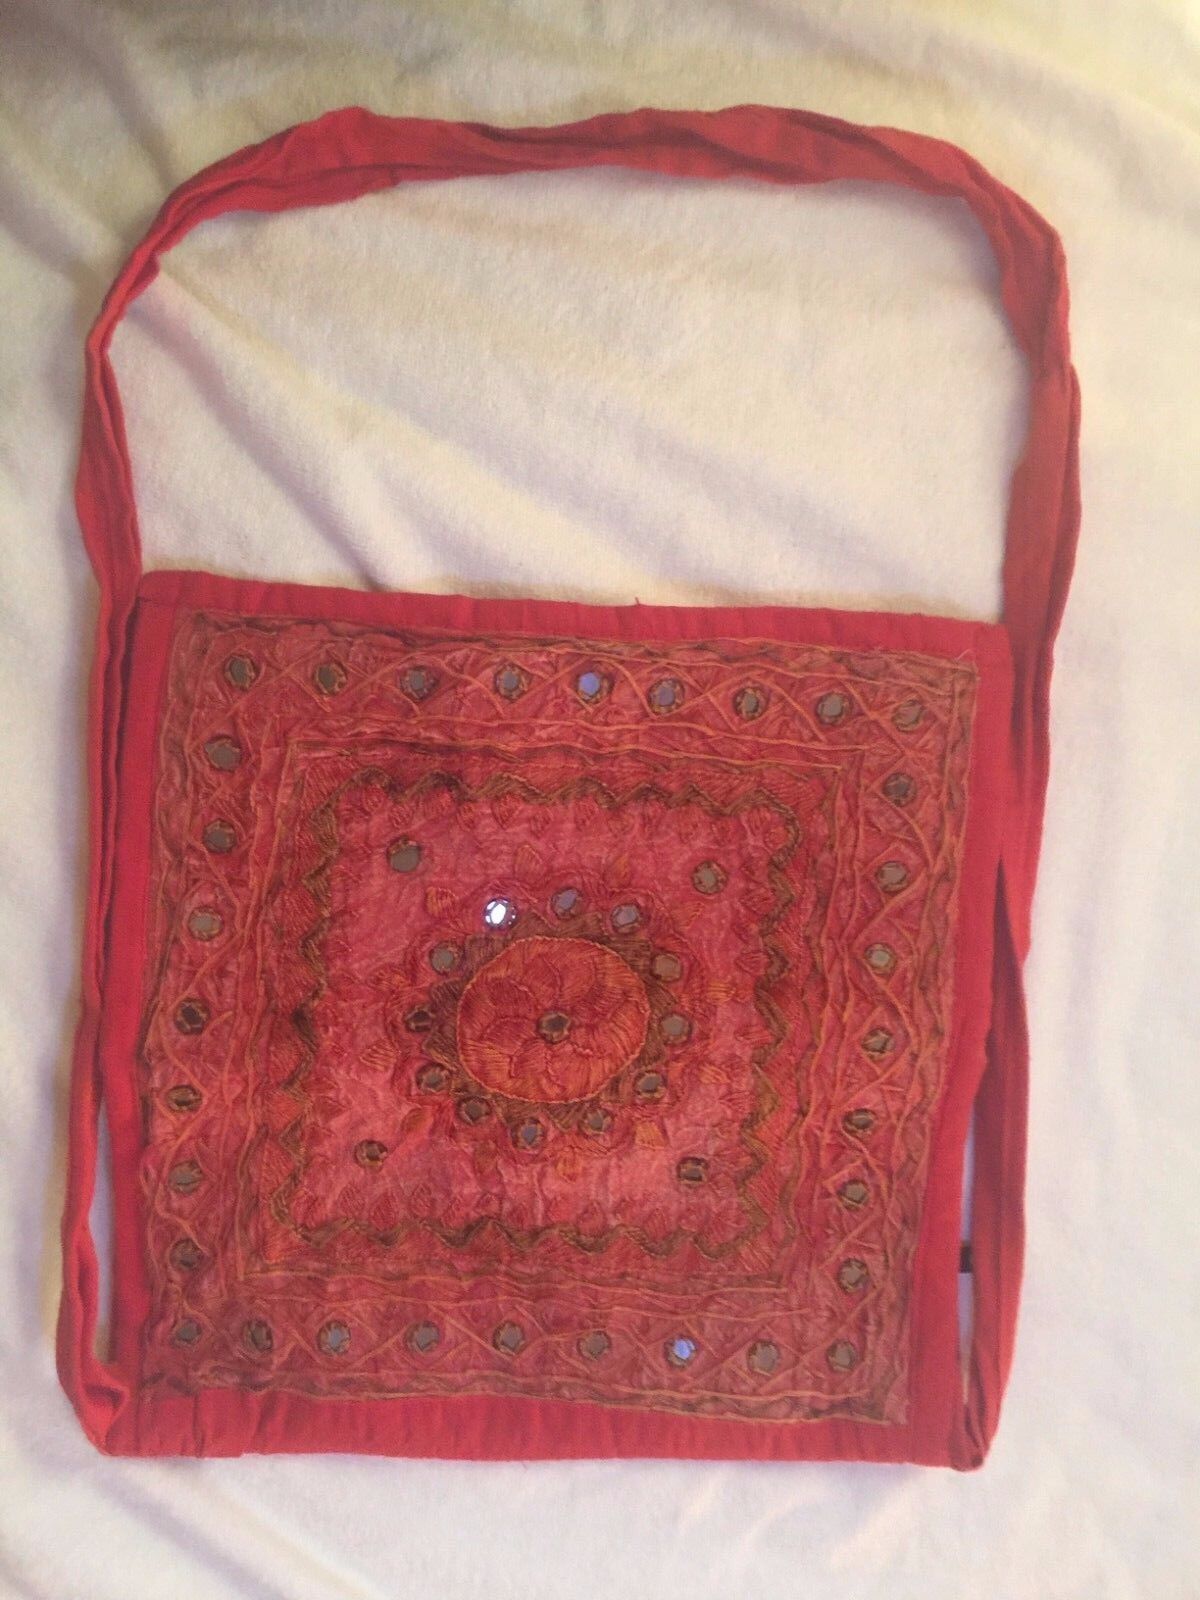 60s Style Mirrored Hobo Hippie Bag.- Red